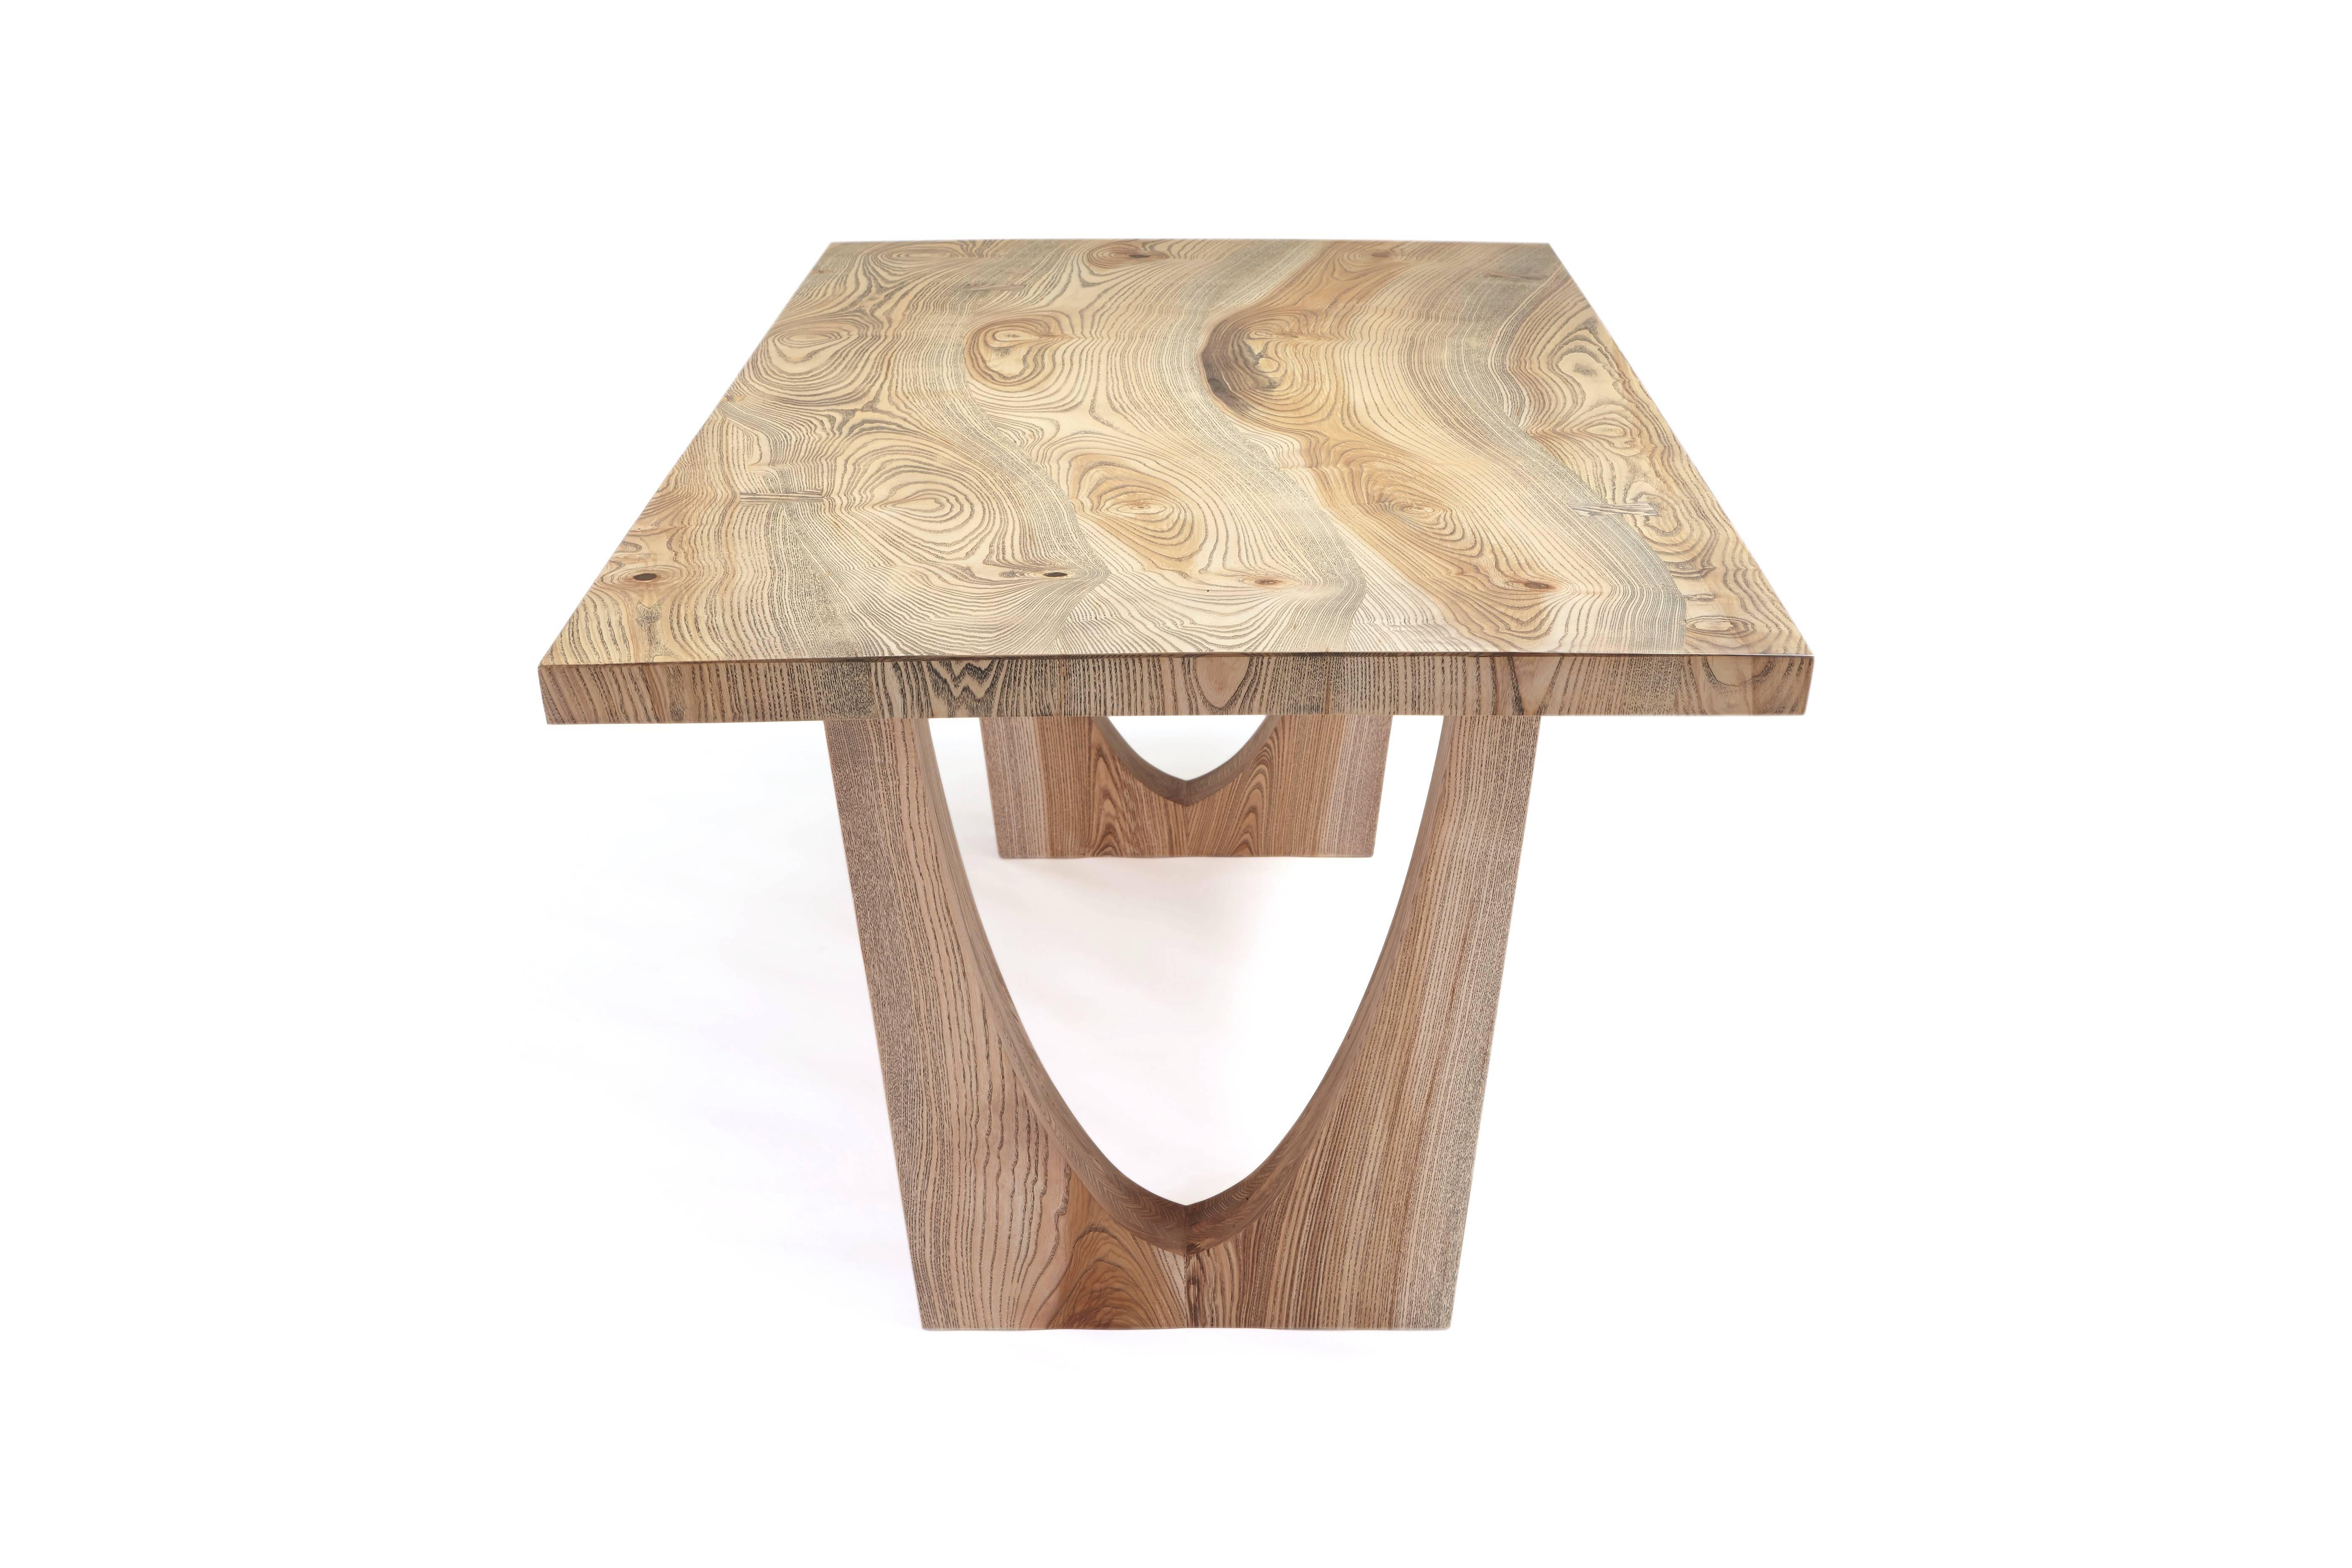 Ash Contemporary ash table with ebony stained grain and white oil finish/ unique 